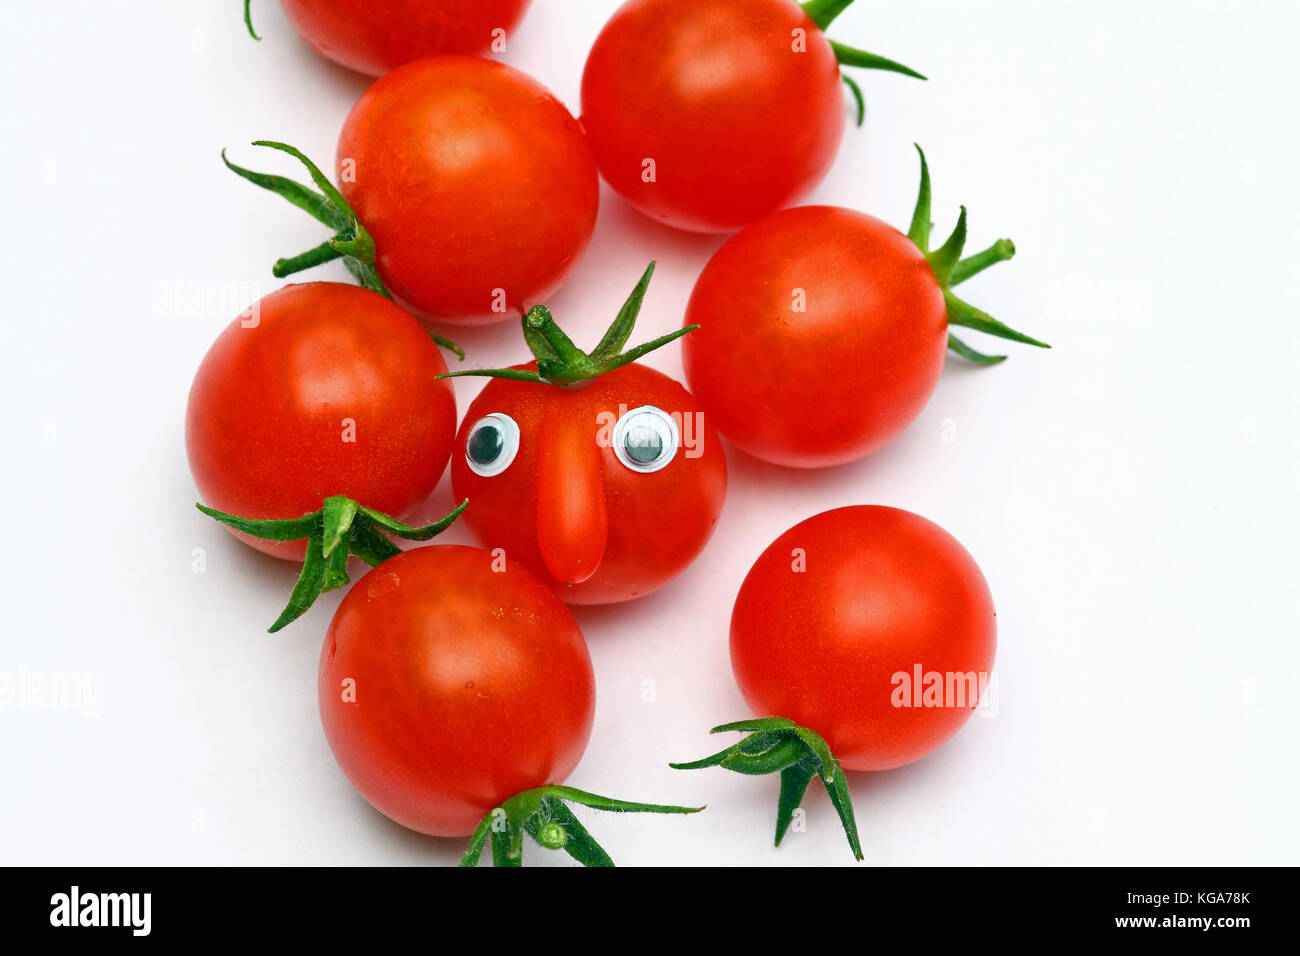 Fresh ripe cherry tomato with a face on a plain background with copy space Stock Photo